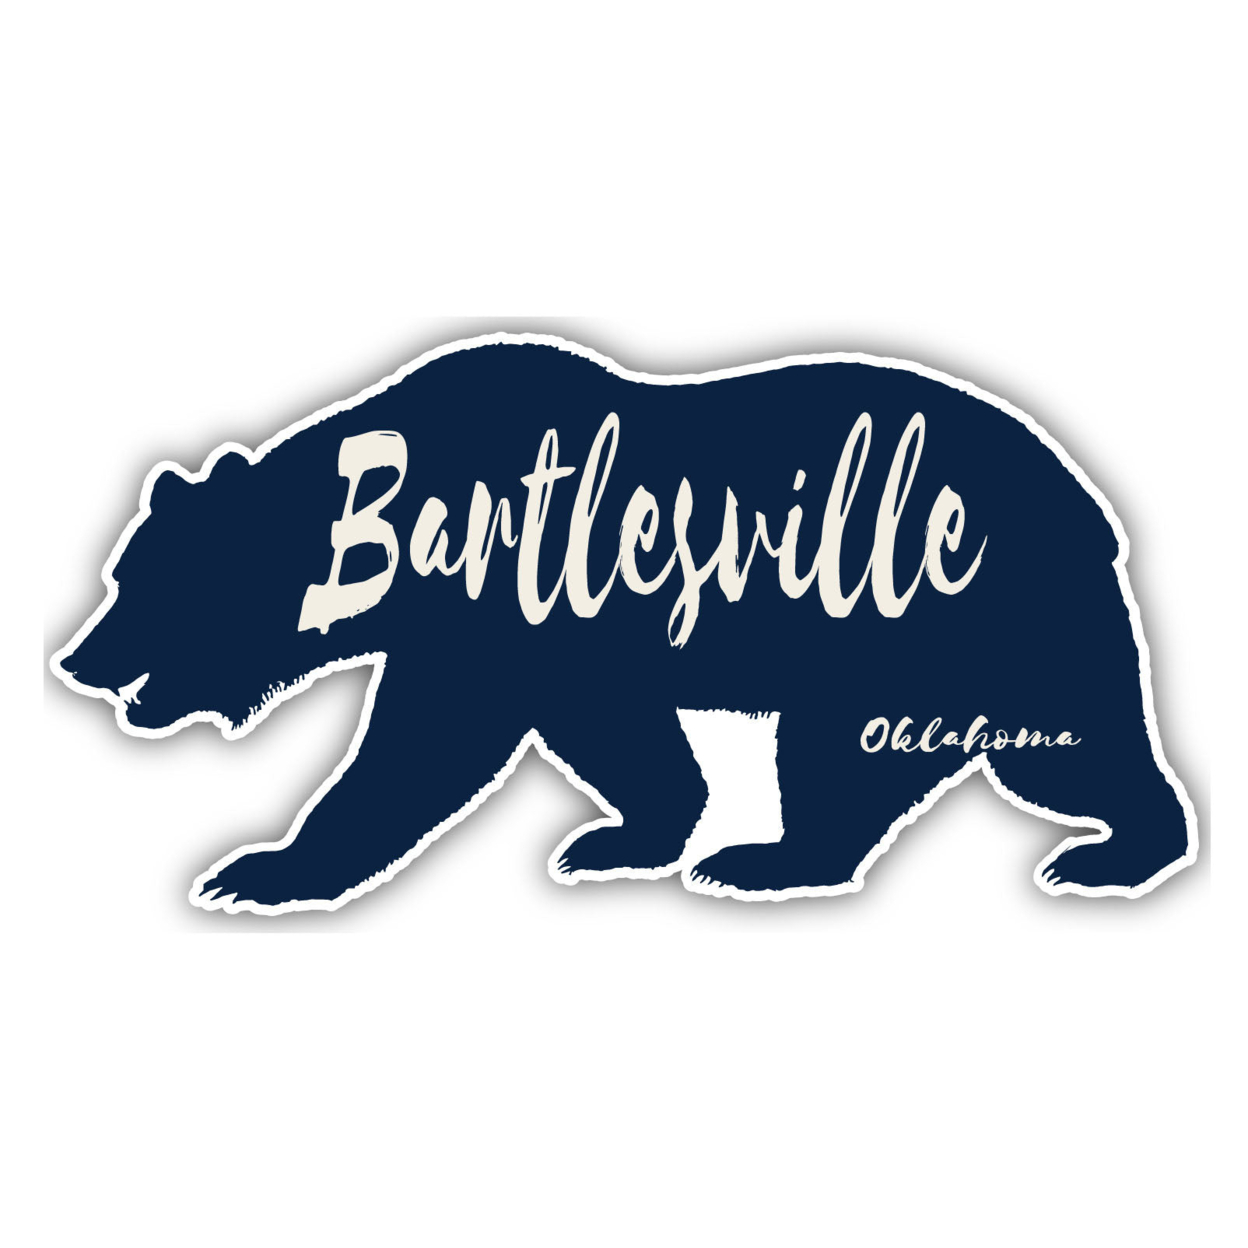 Bartlesville Oklahoma Souvenir Decorative Stickers (Choose Theme And Size) - 4-Pack, 6-Inch, Bear